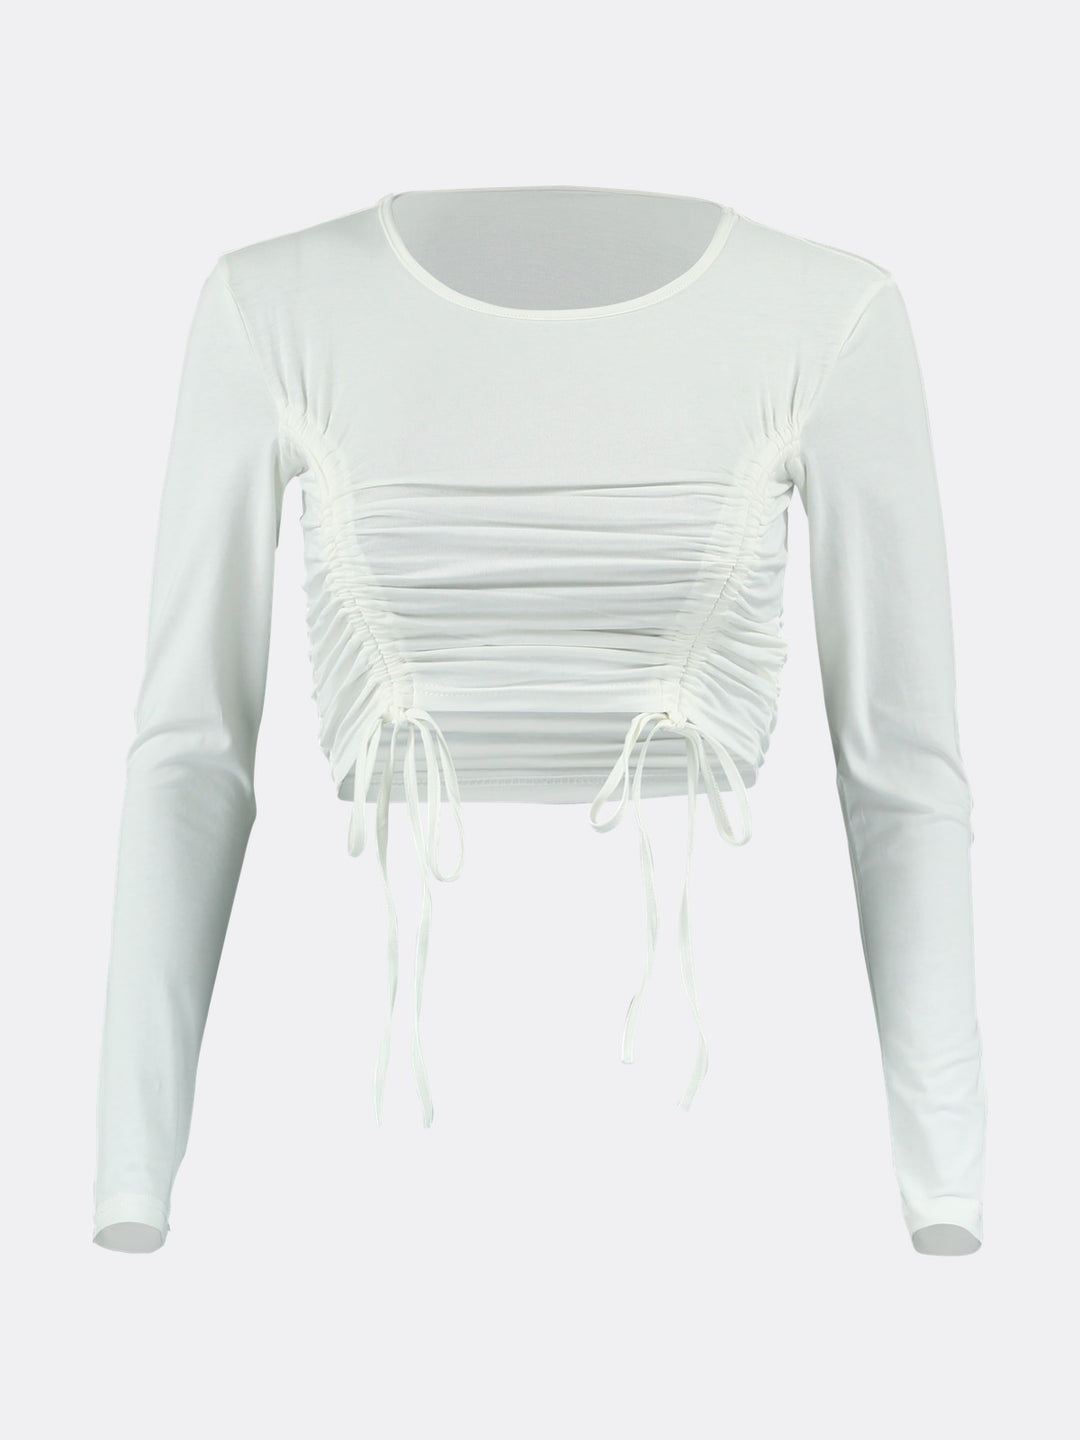 Round Neckline Long Sleeve Blouse with Adjustable Gathered Details White Ghost